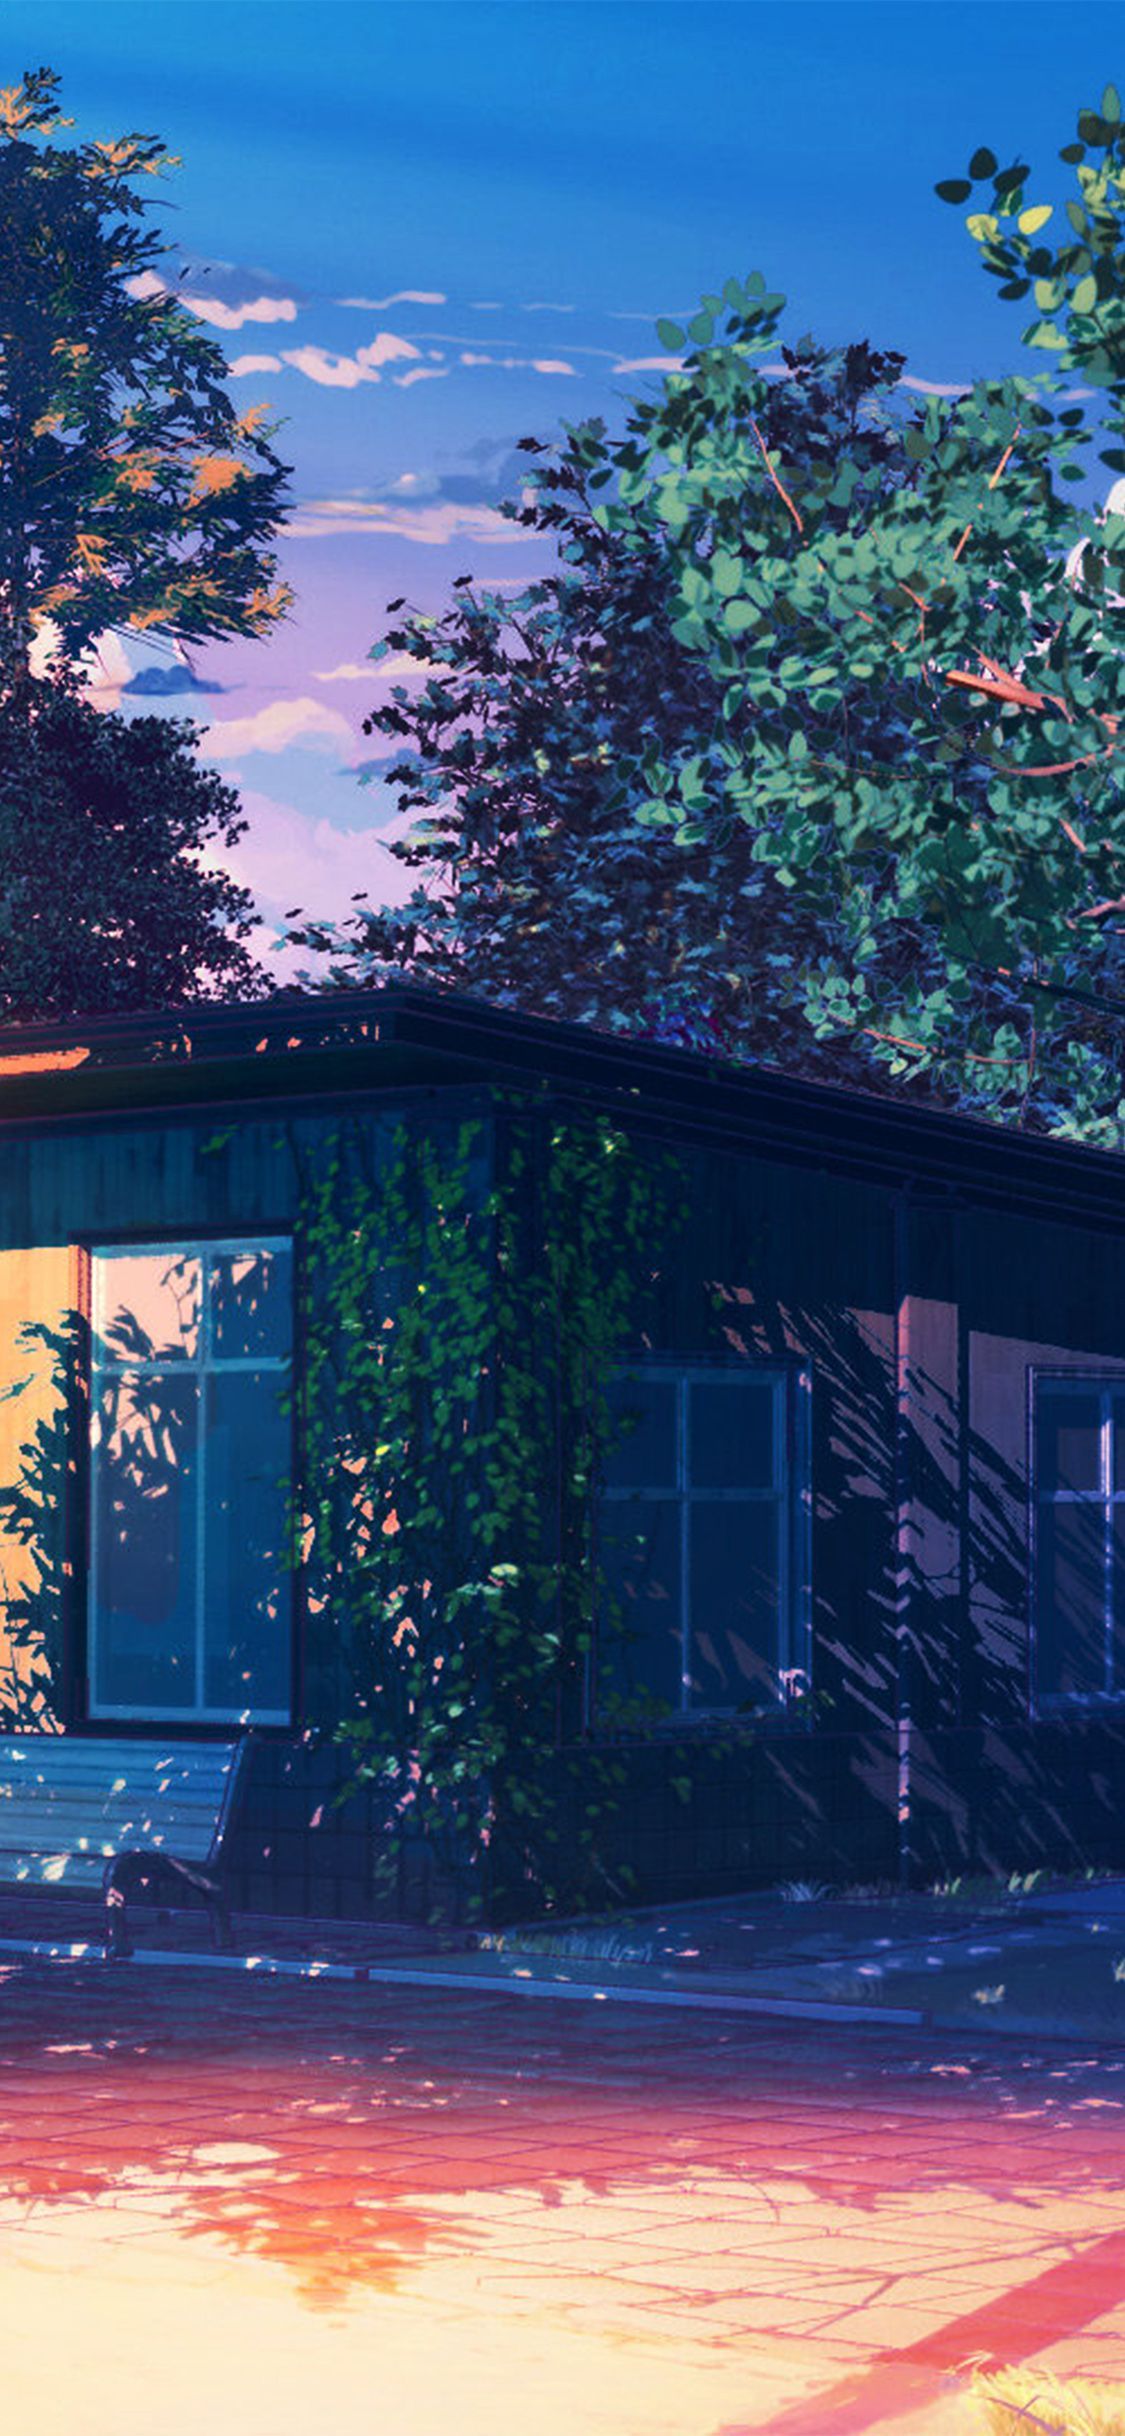 IPhone wallpaper of a anime house in the sunset - Camping